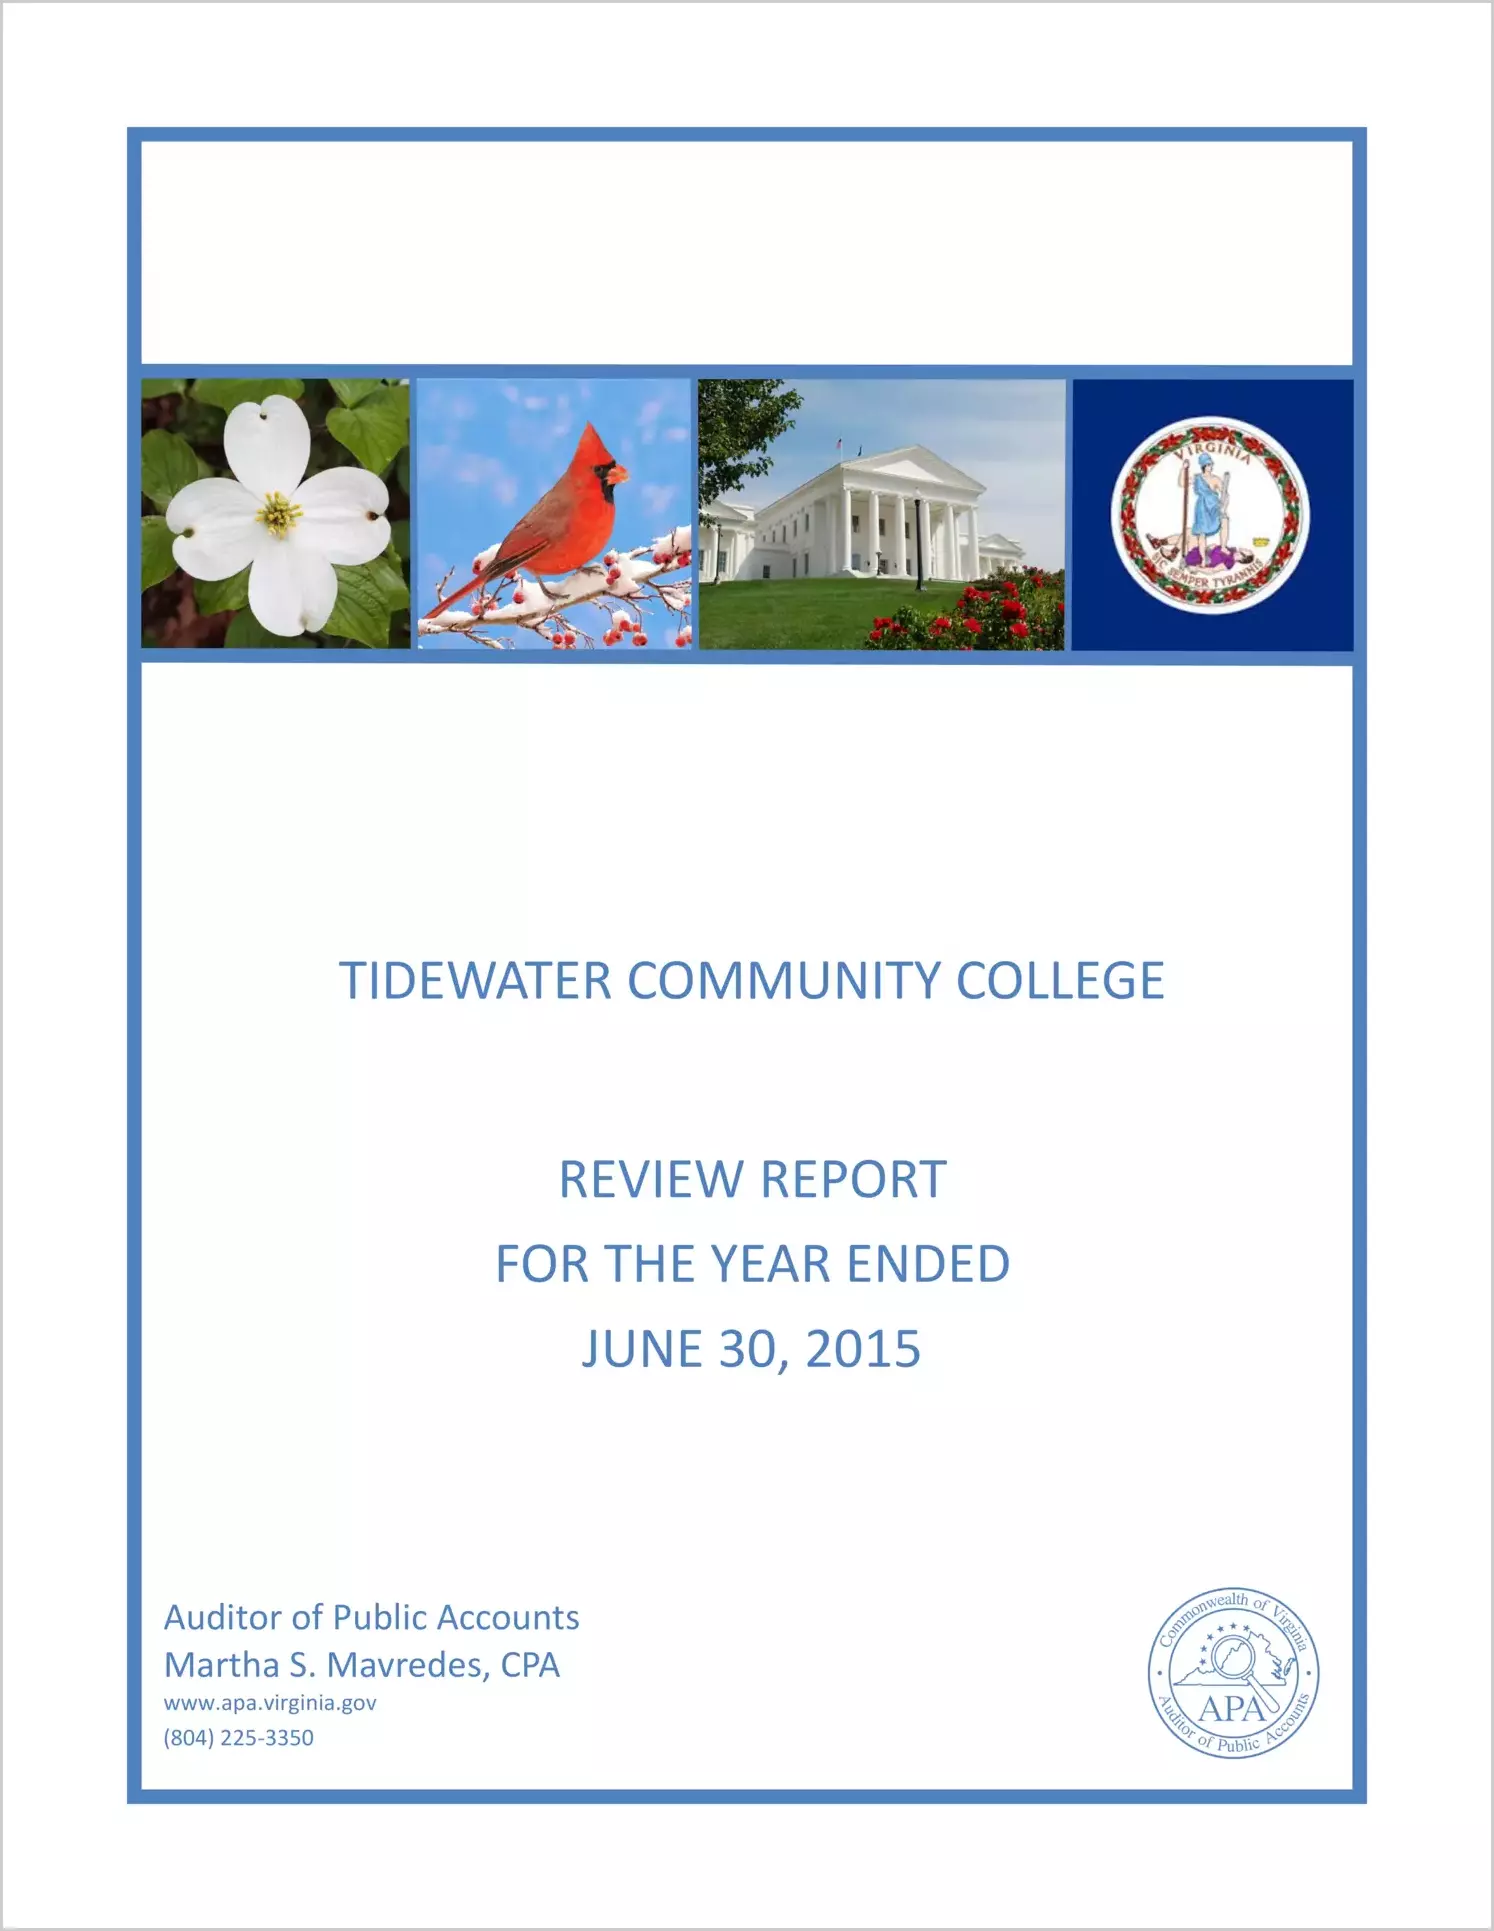 Tidewater Community College Report on review for the year ended June 30, 2015